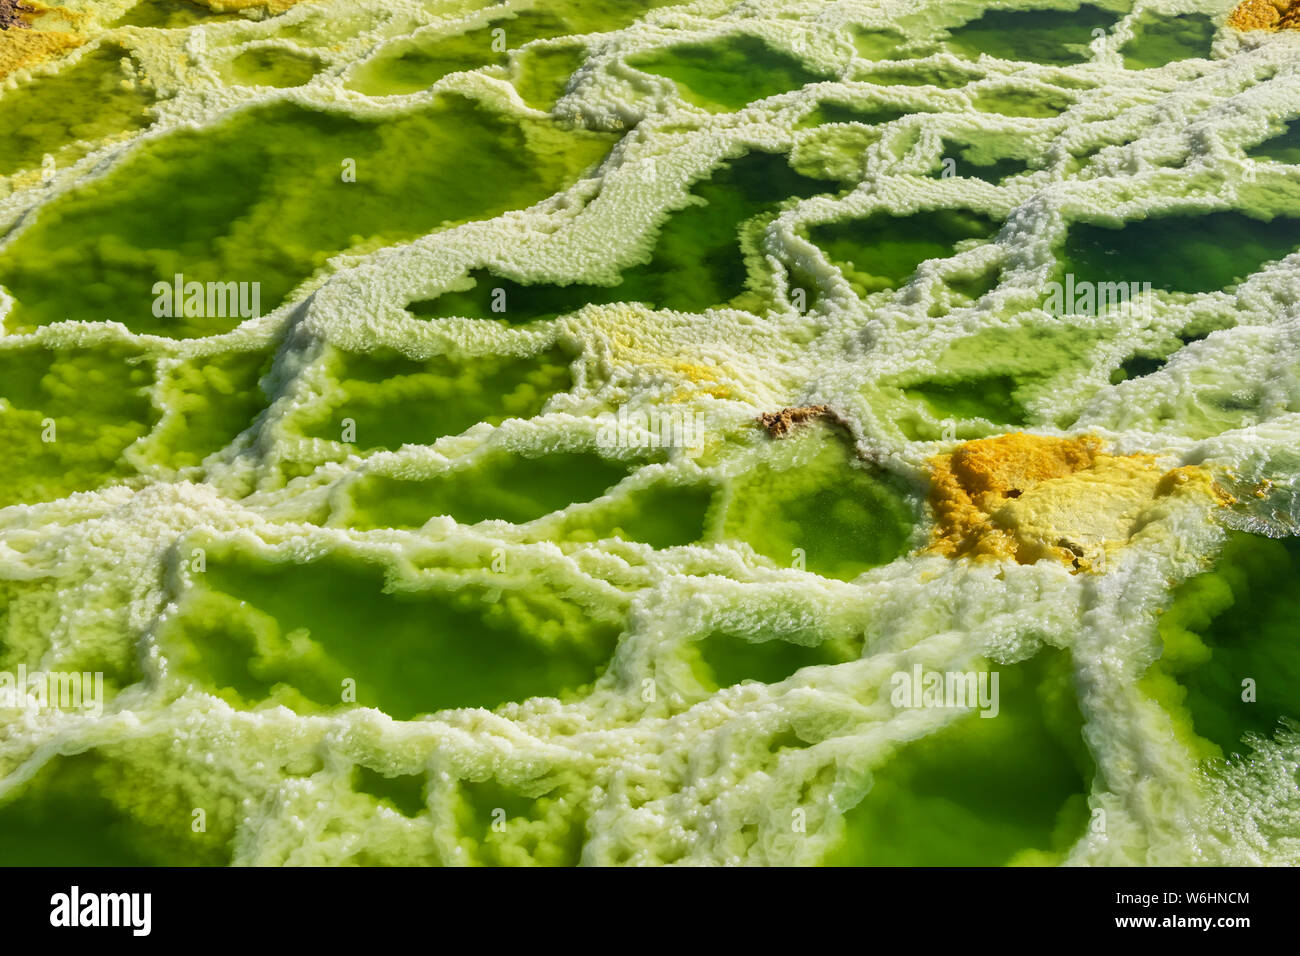 Acidic hot springs and geysers, mineral formations, salt deposits in the crater of Dallol Volcano, Danakil Depression; Afar Region, Ethiopia Stock Photo